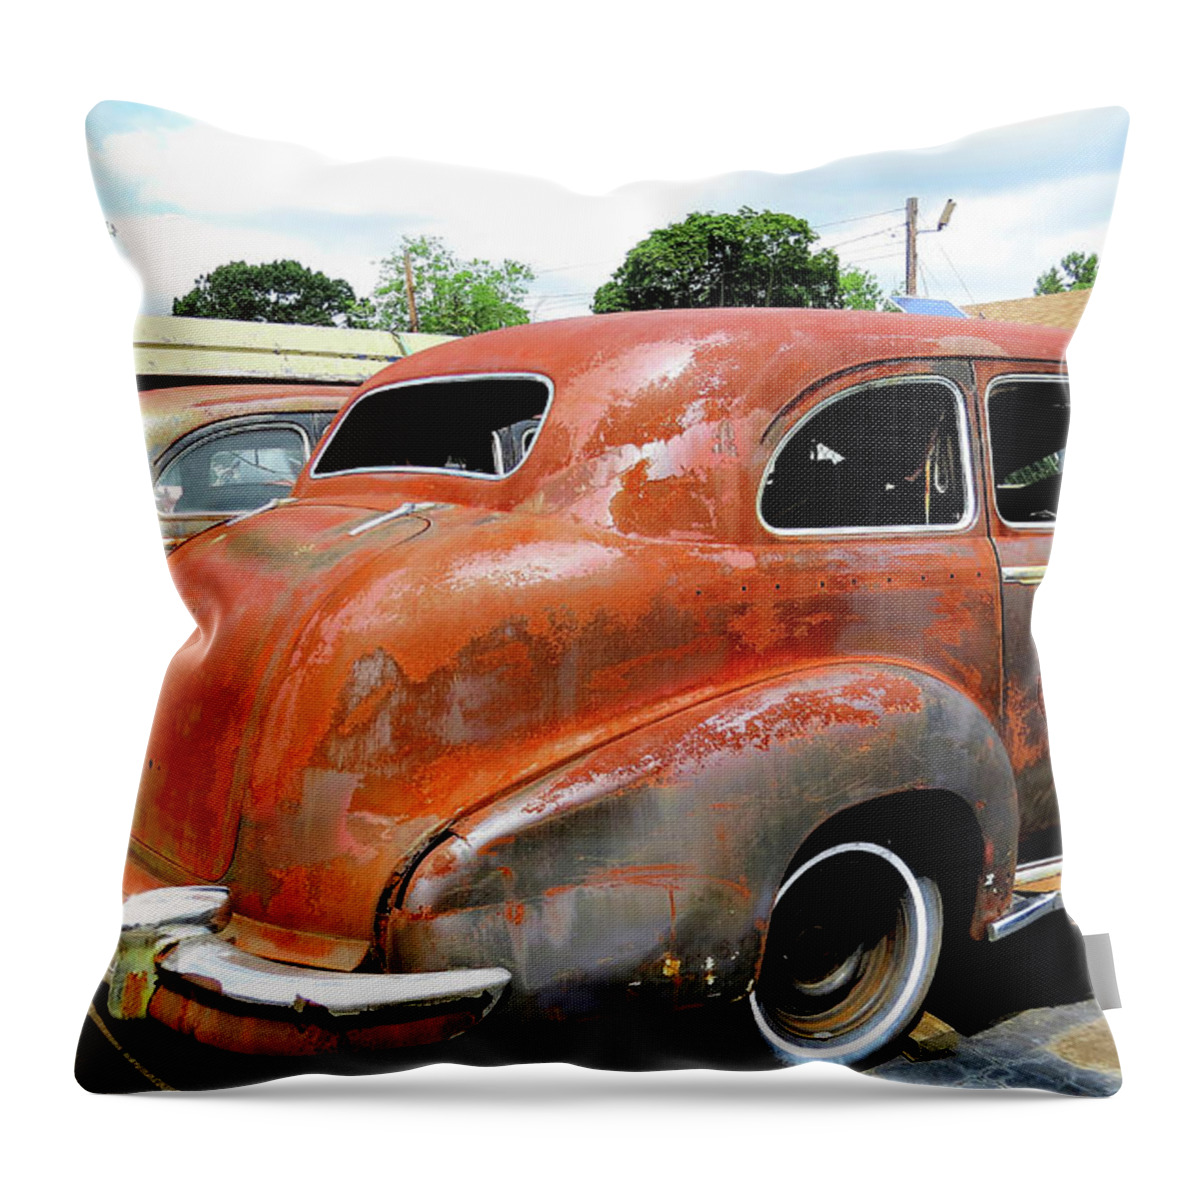 Cadillac Throw Pillow featuring the photograph Pair of Rusty 1947 Cadillac Imperial Limos by Linda Stern